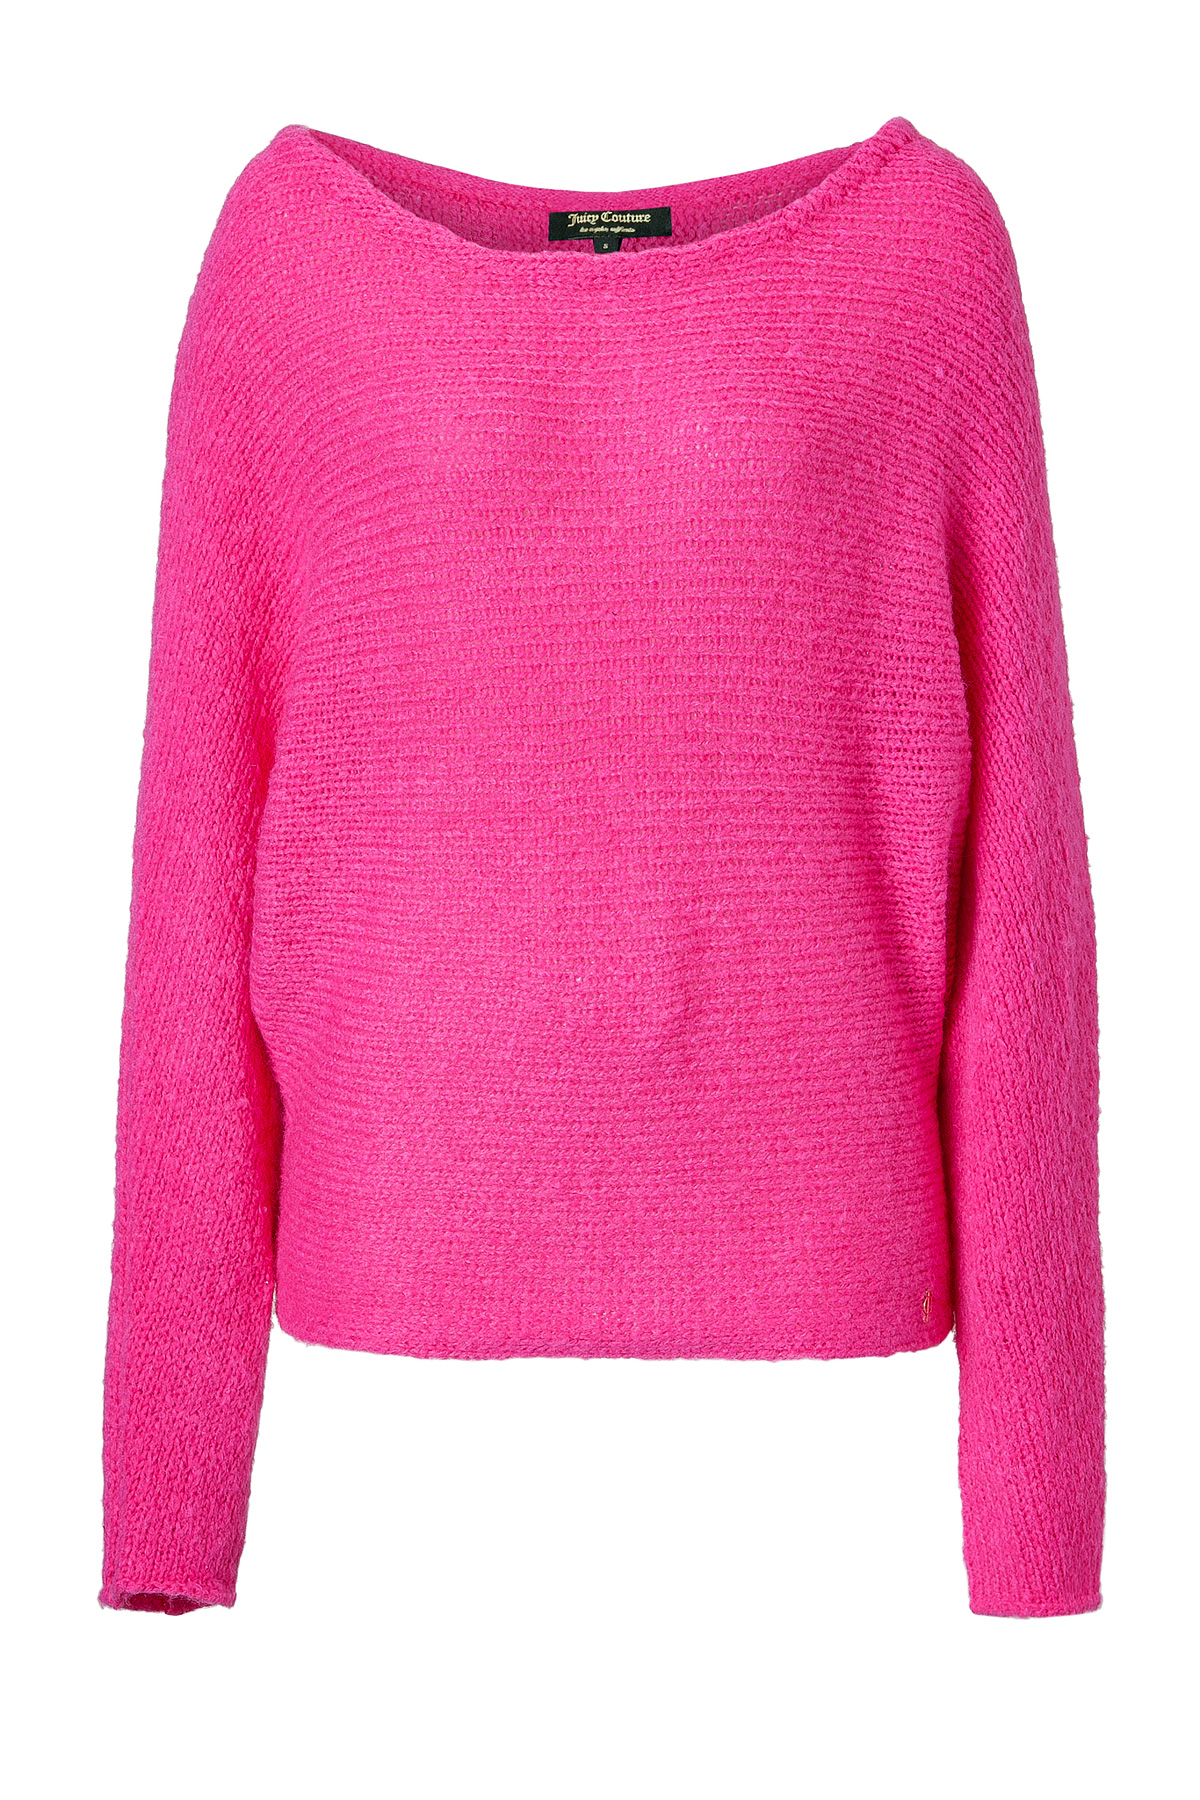 Lyst - Juicy Couture Oversized Fluffy Sweater in Pink